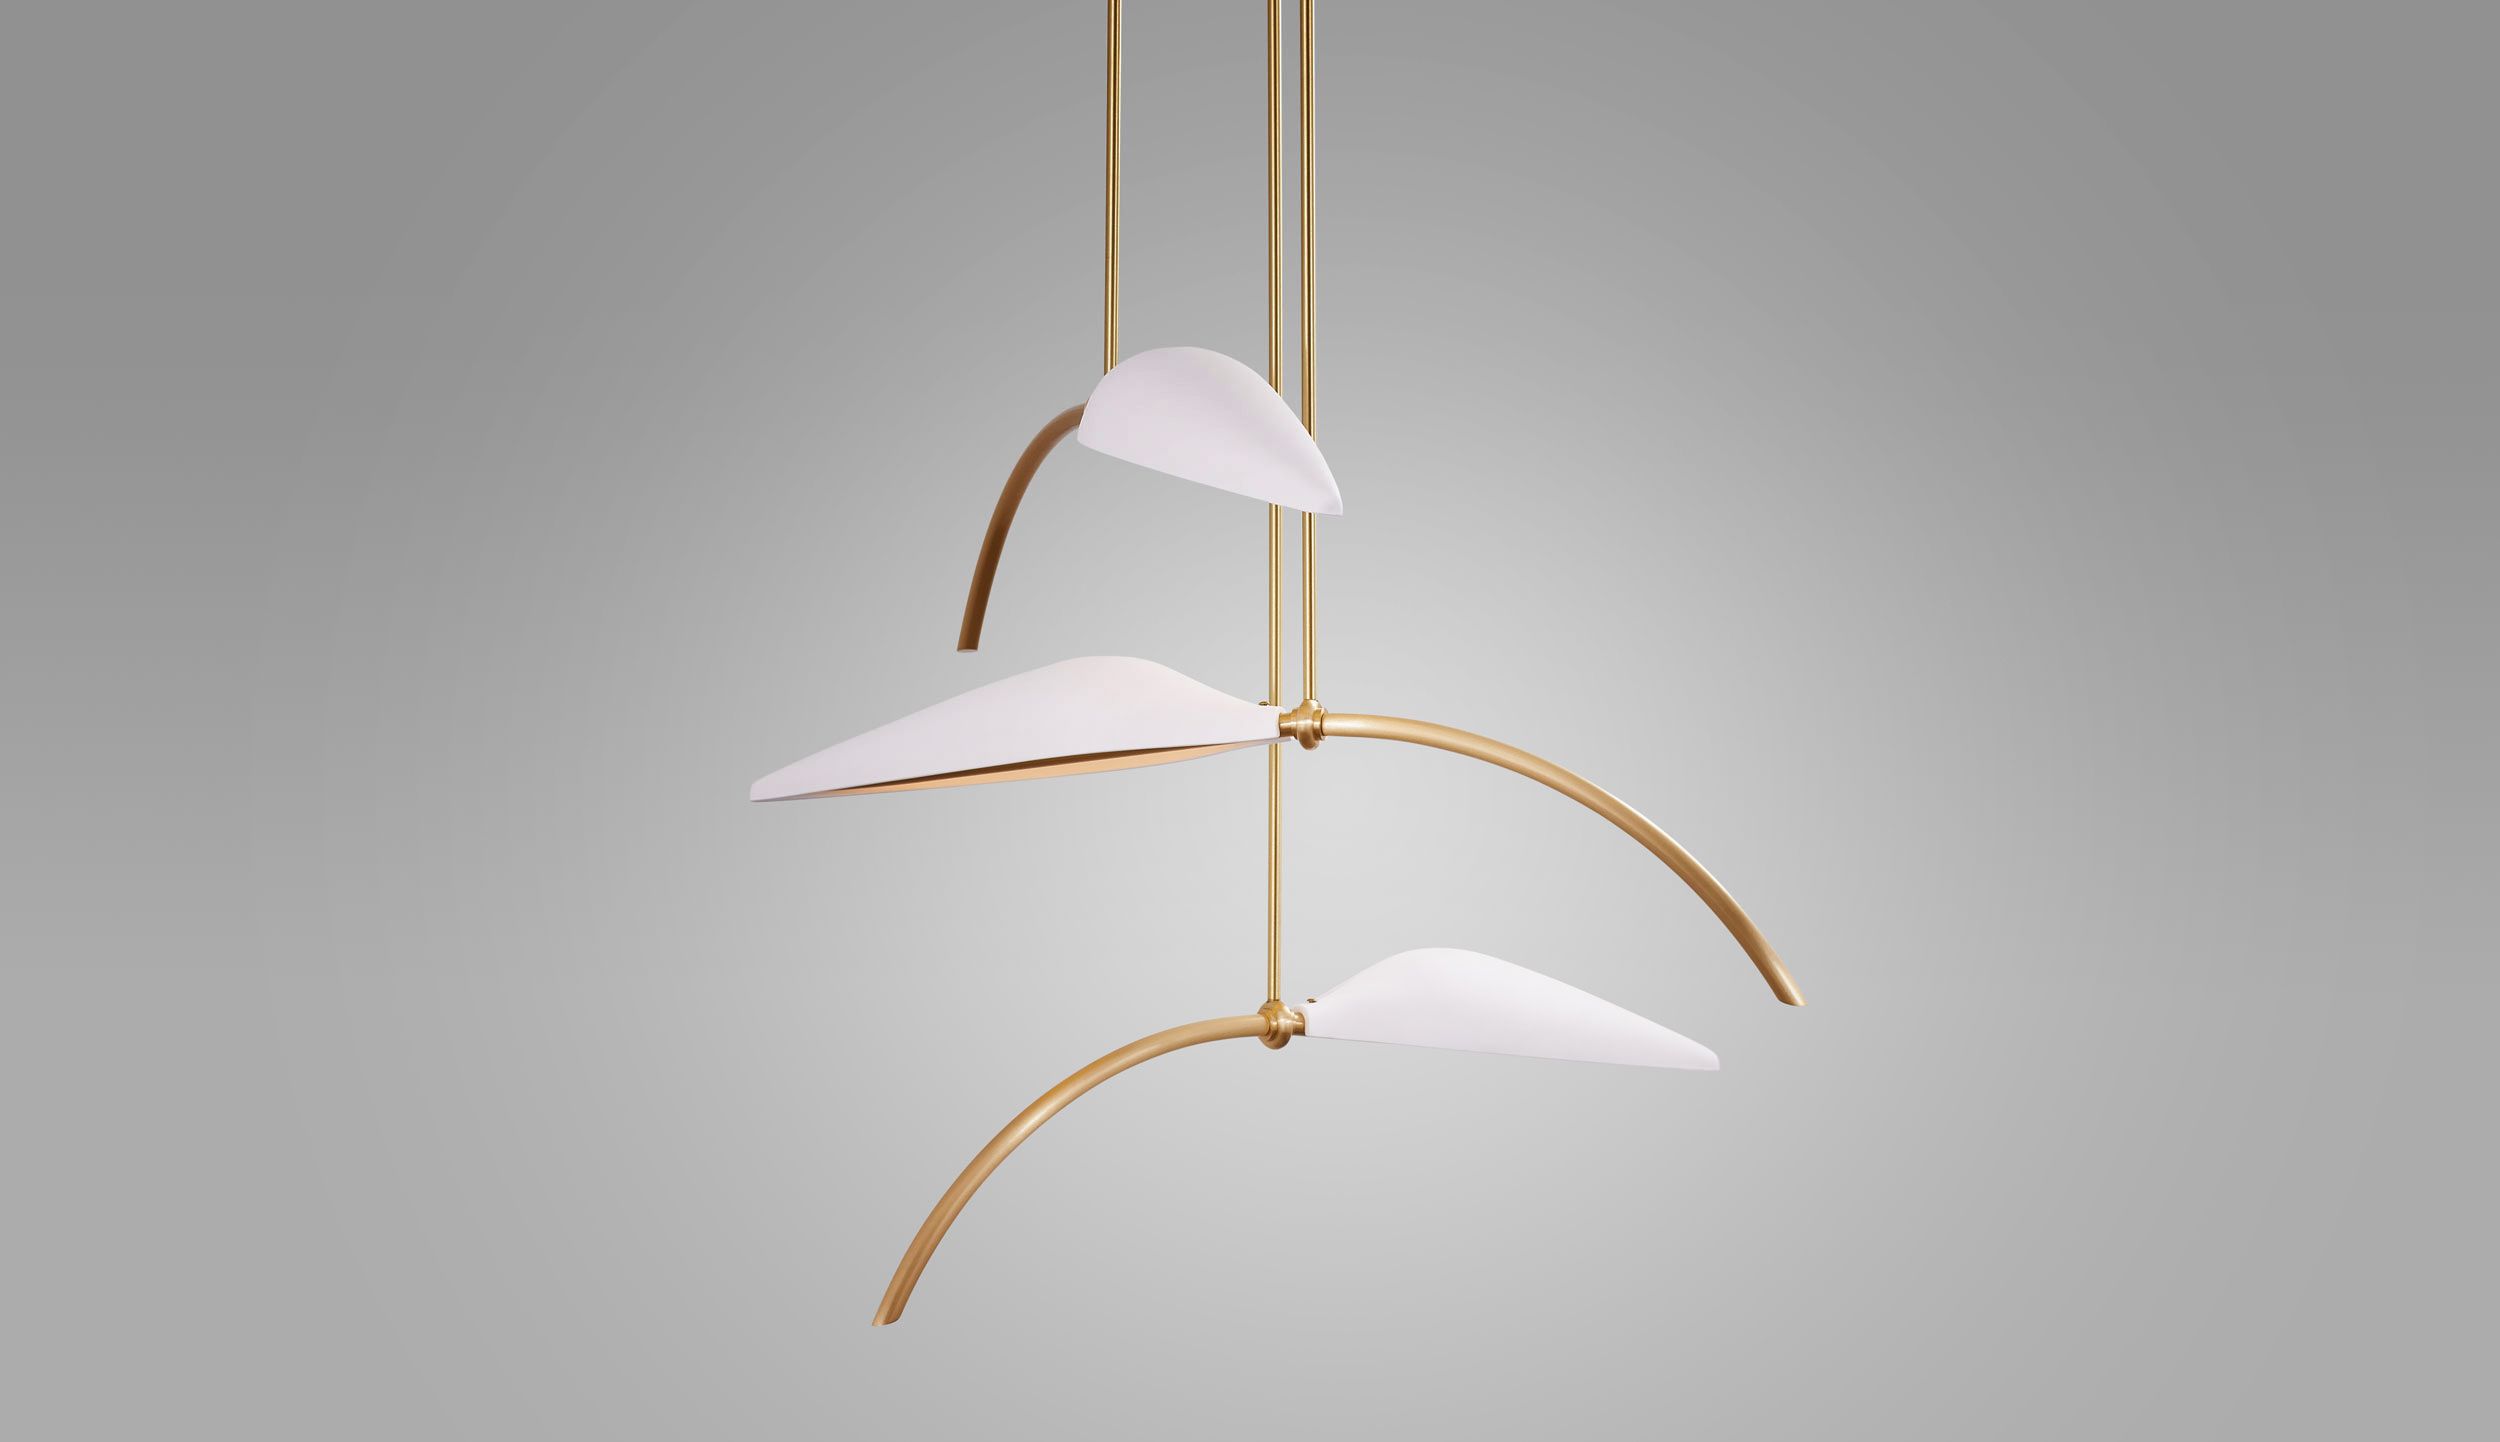 The Boyd Lighting Spire Series, The Spire Leaf Pendant is a poetic and architectural pendant for residential and commercial spaces, designed meets poetry in beautiful lighting.